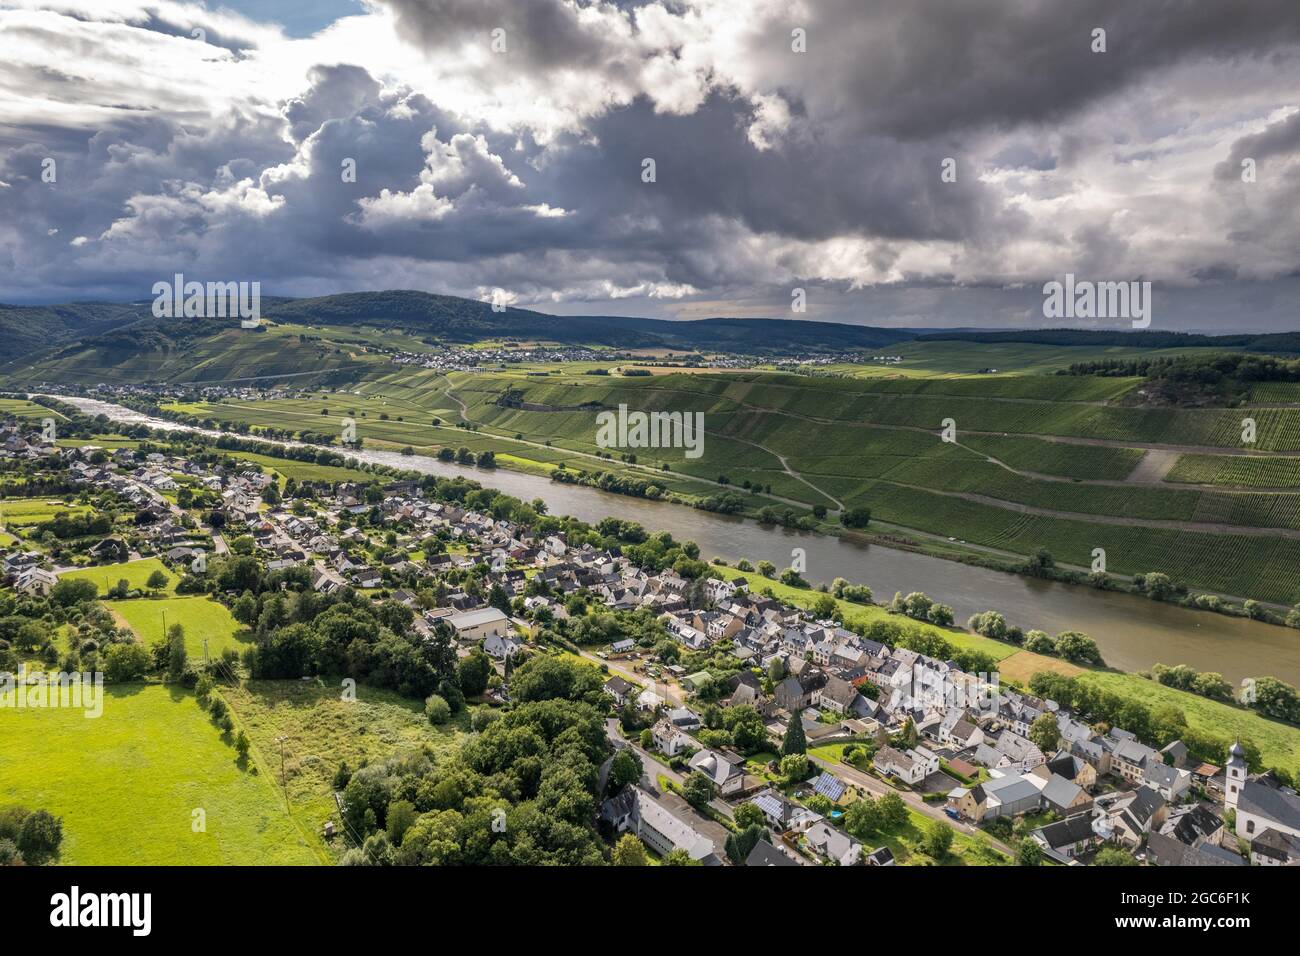 Aerial view of a landscape in Rhineland-Palatinate, Germany on the river Moselle with the village Brauneberg Stock Photo